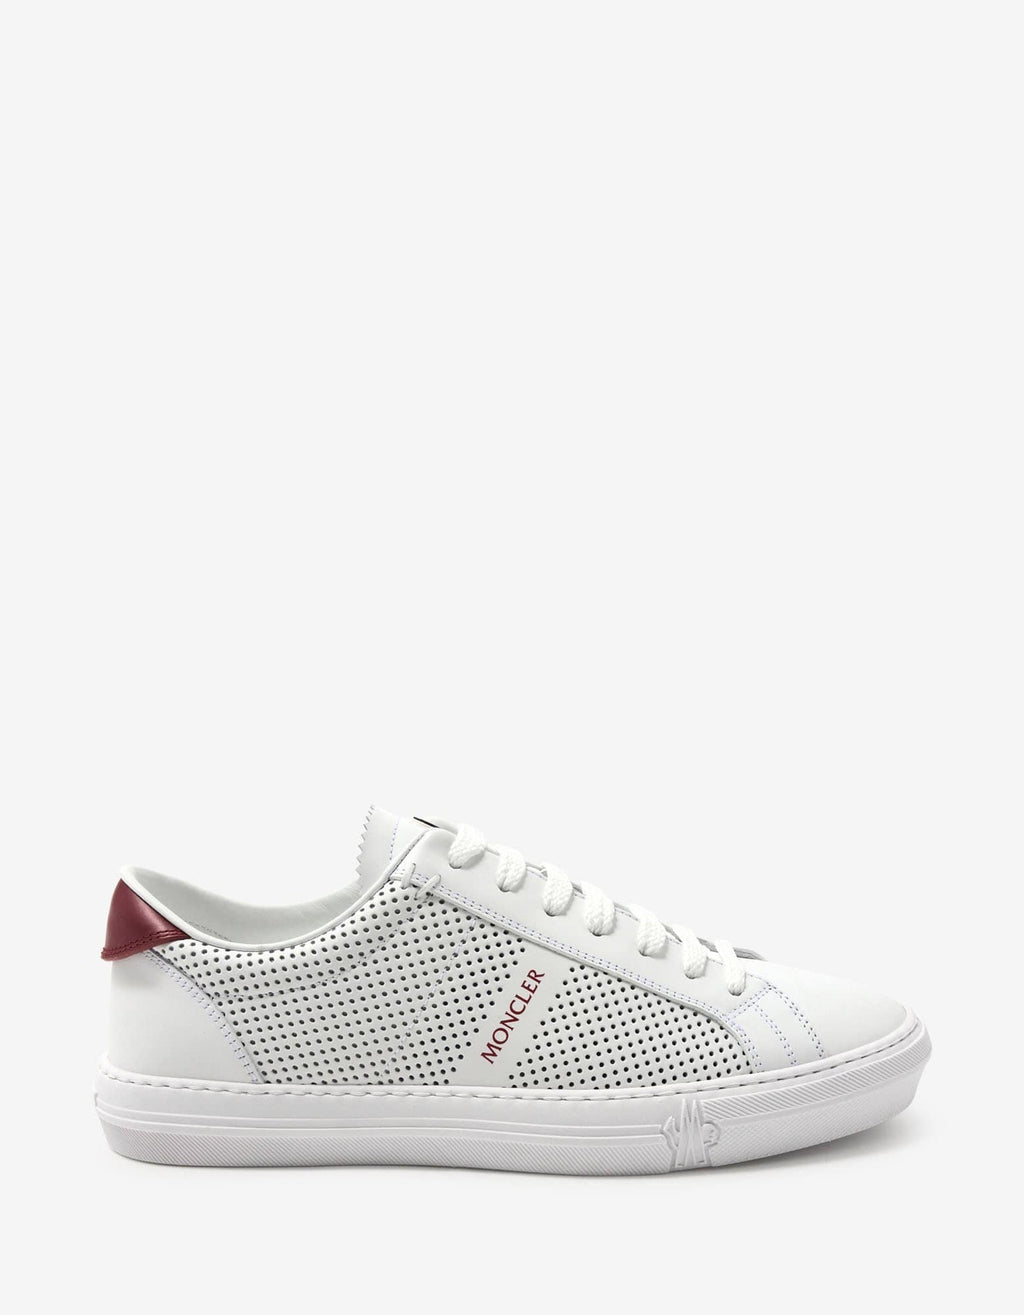 Moncler New Monaco White Perforated Trainers